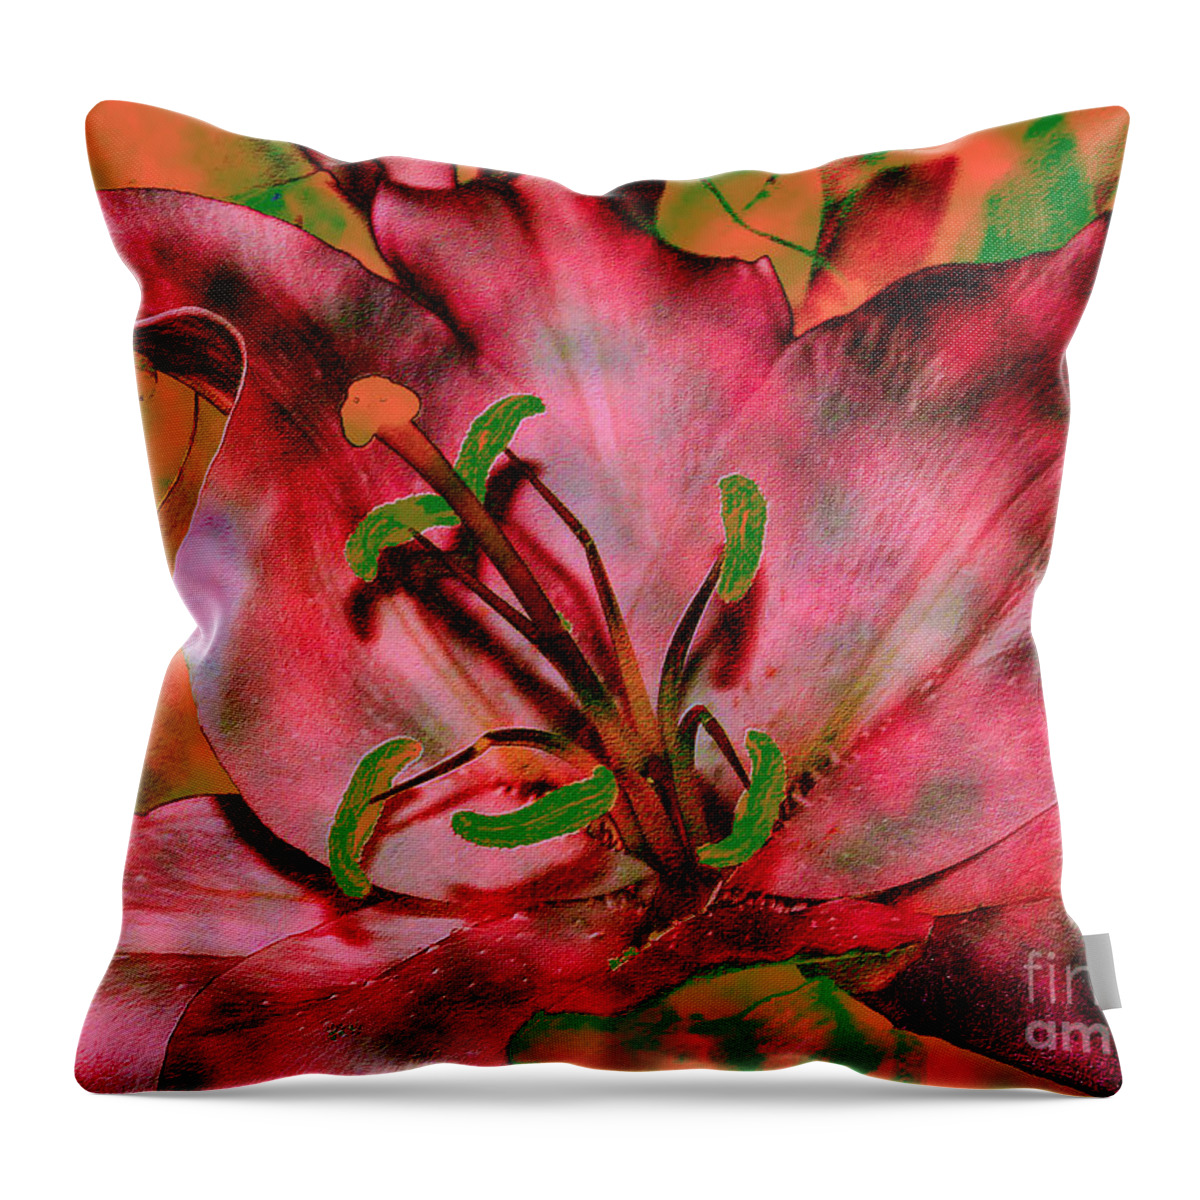 Orchid Throw Pillow featuring the photograph Orchid by Warren Kasow